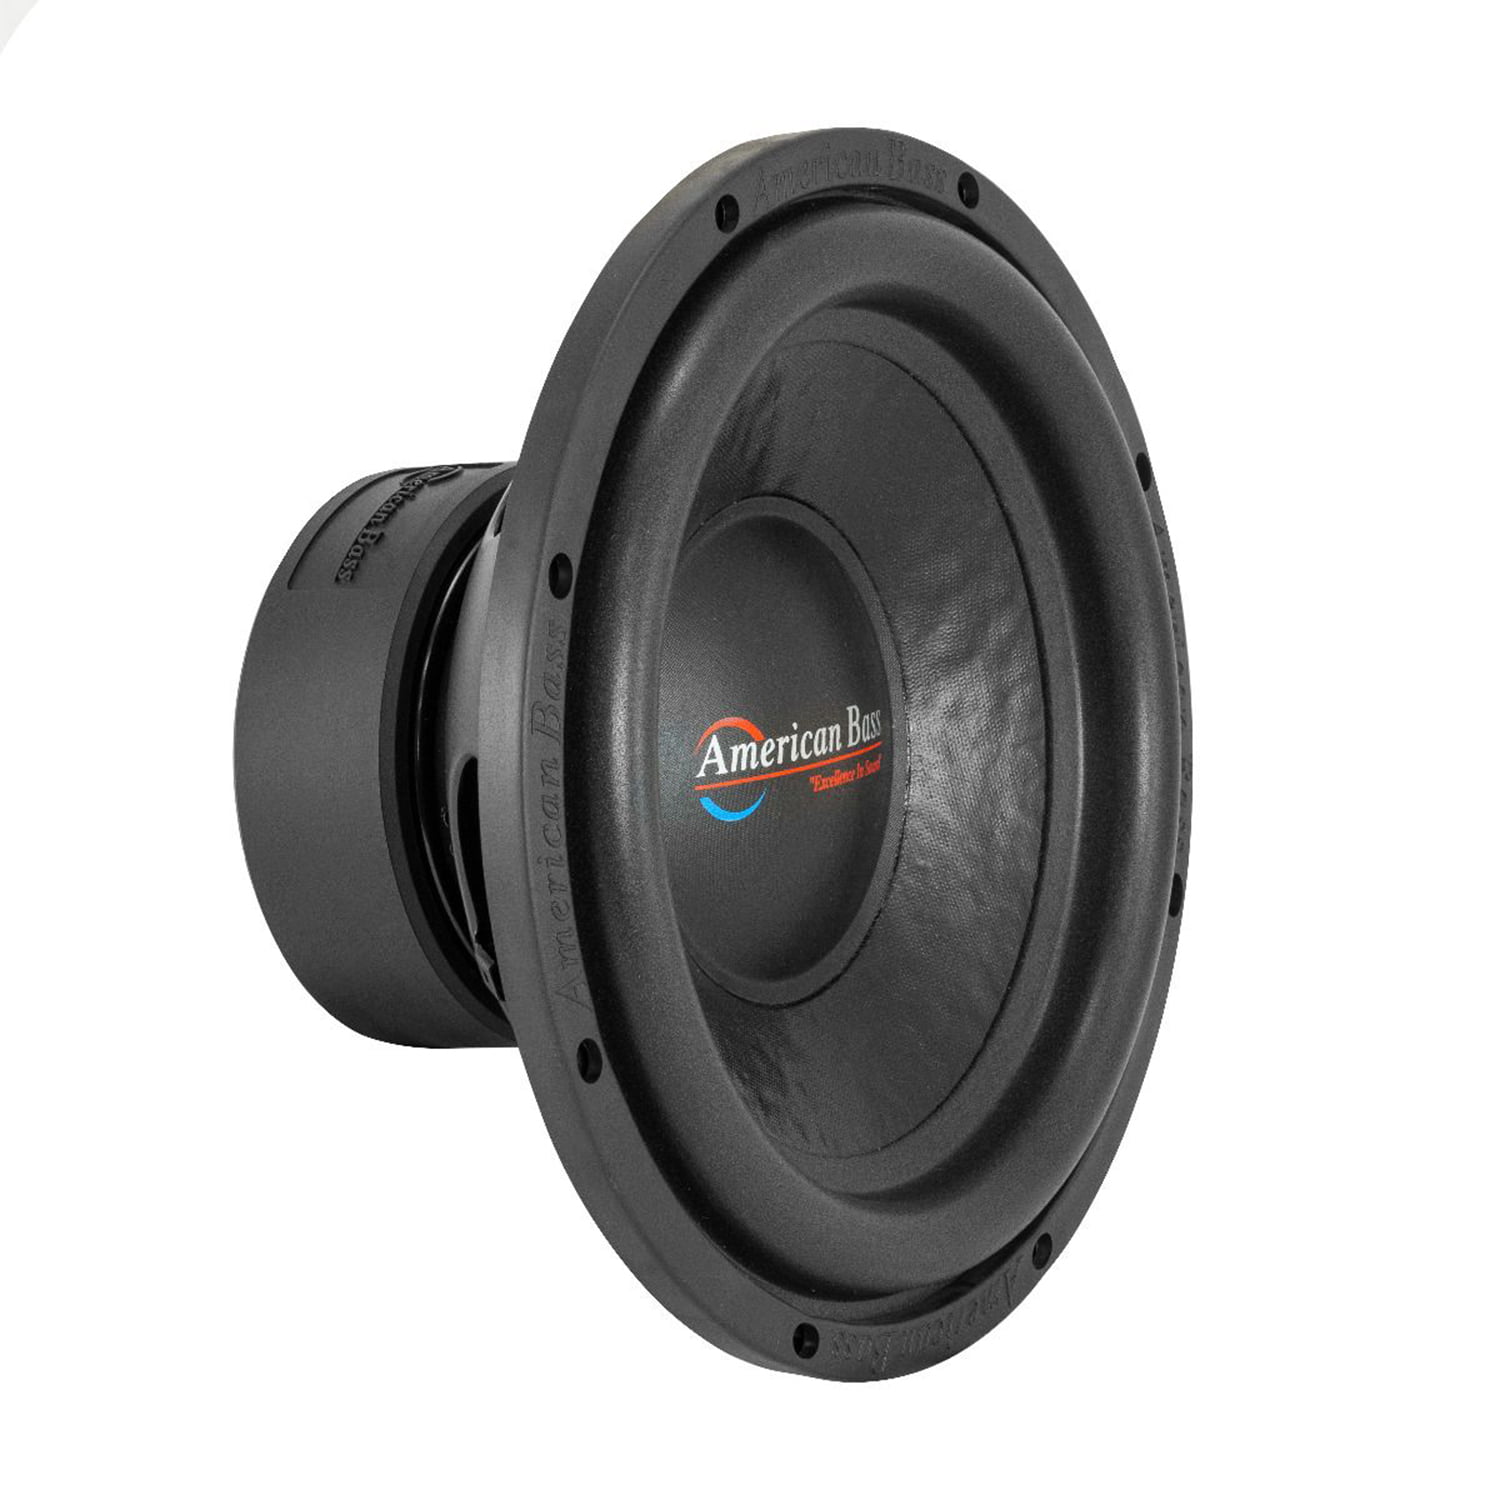 NEW 12" DVC Subwoofer Bass.Replacement.Speaker.Dual 4 ohm Voice Coil .800w Sub. 